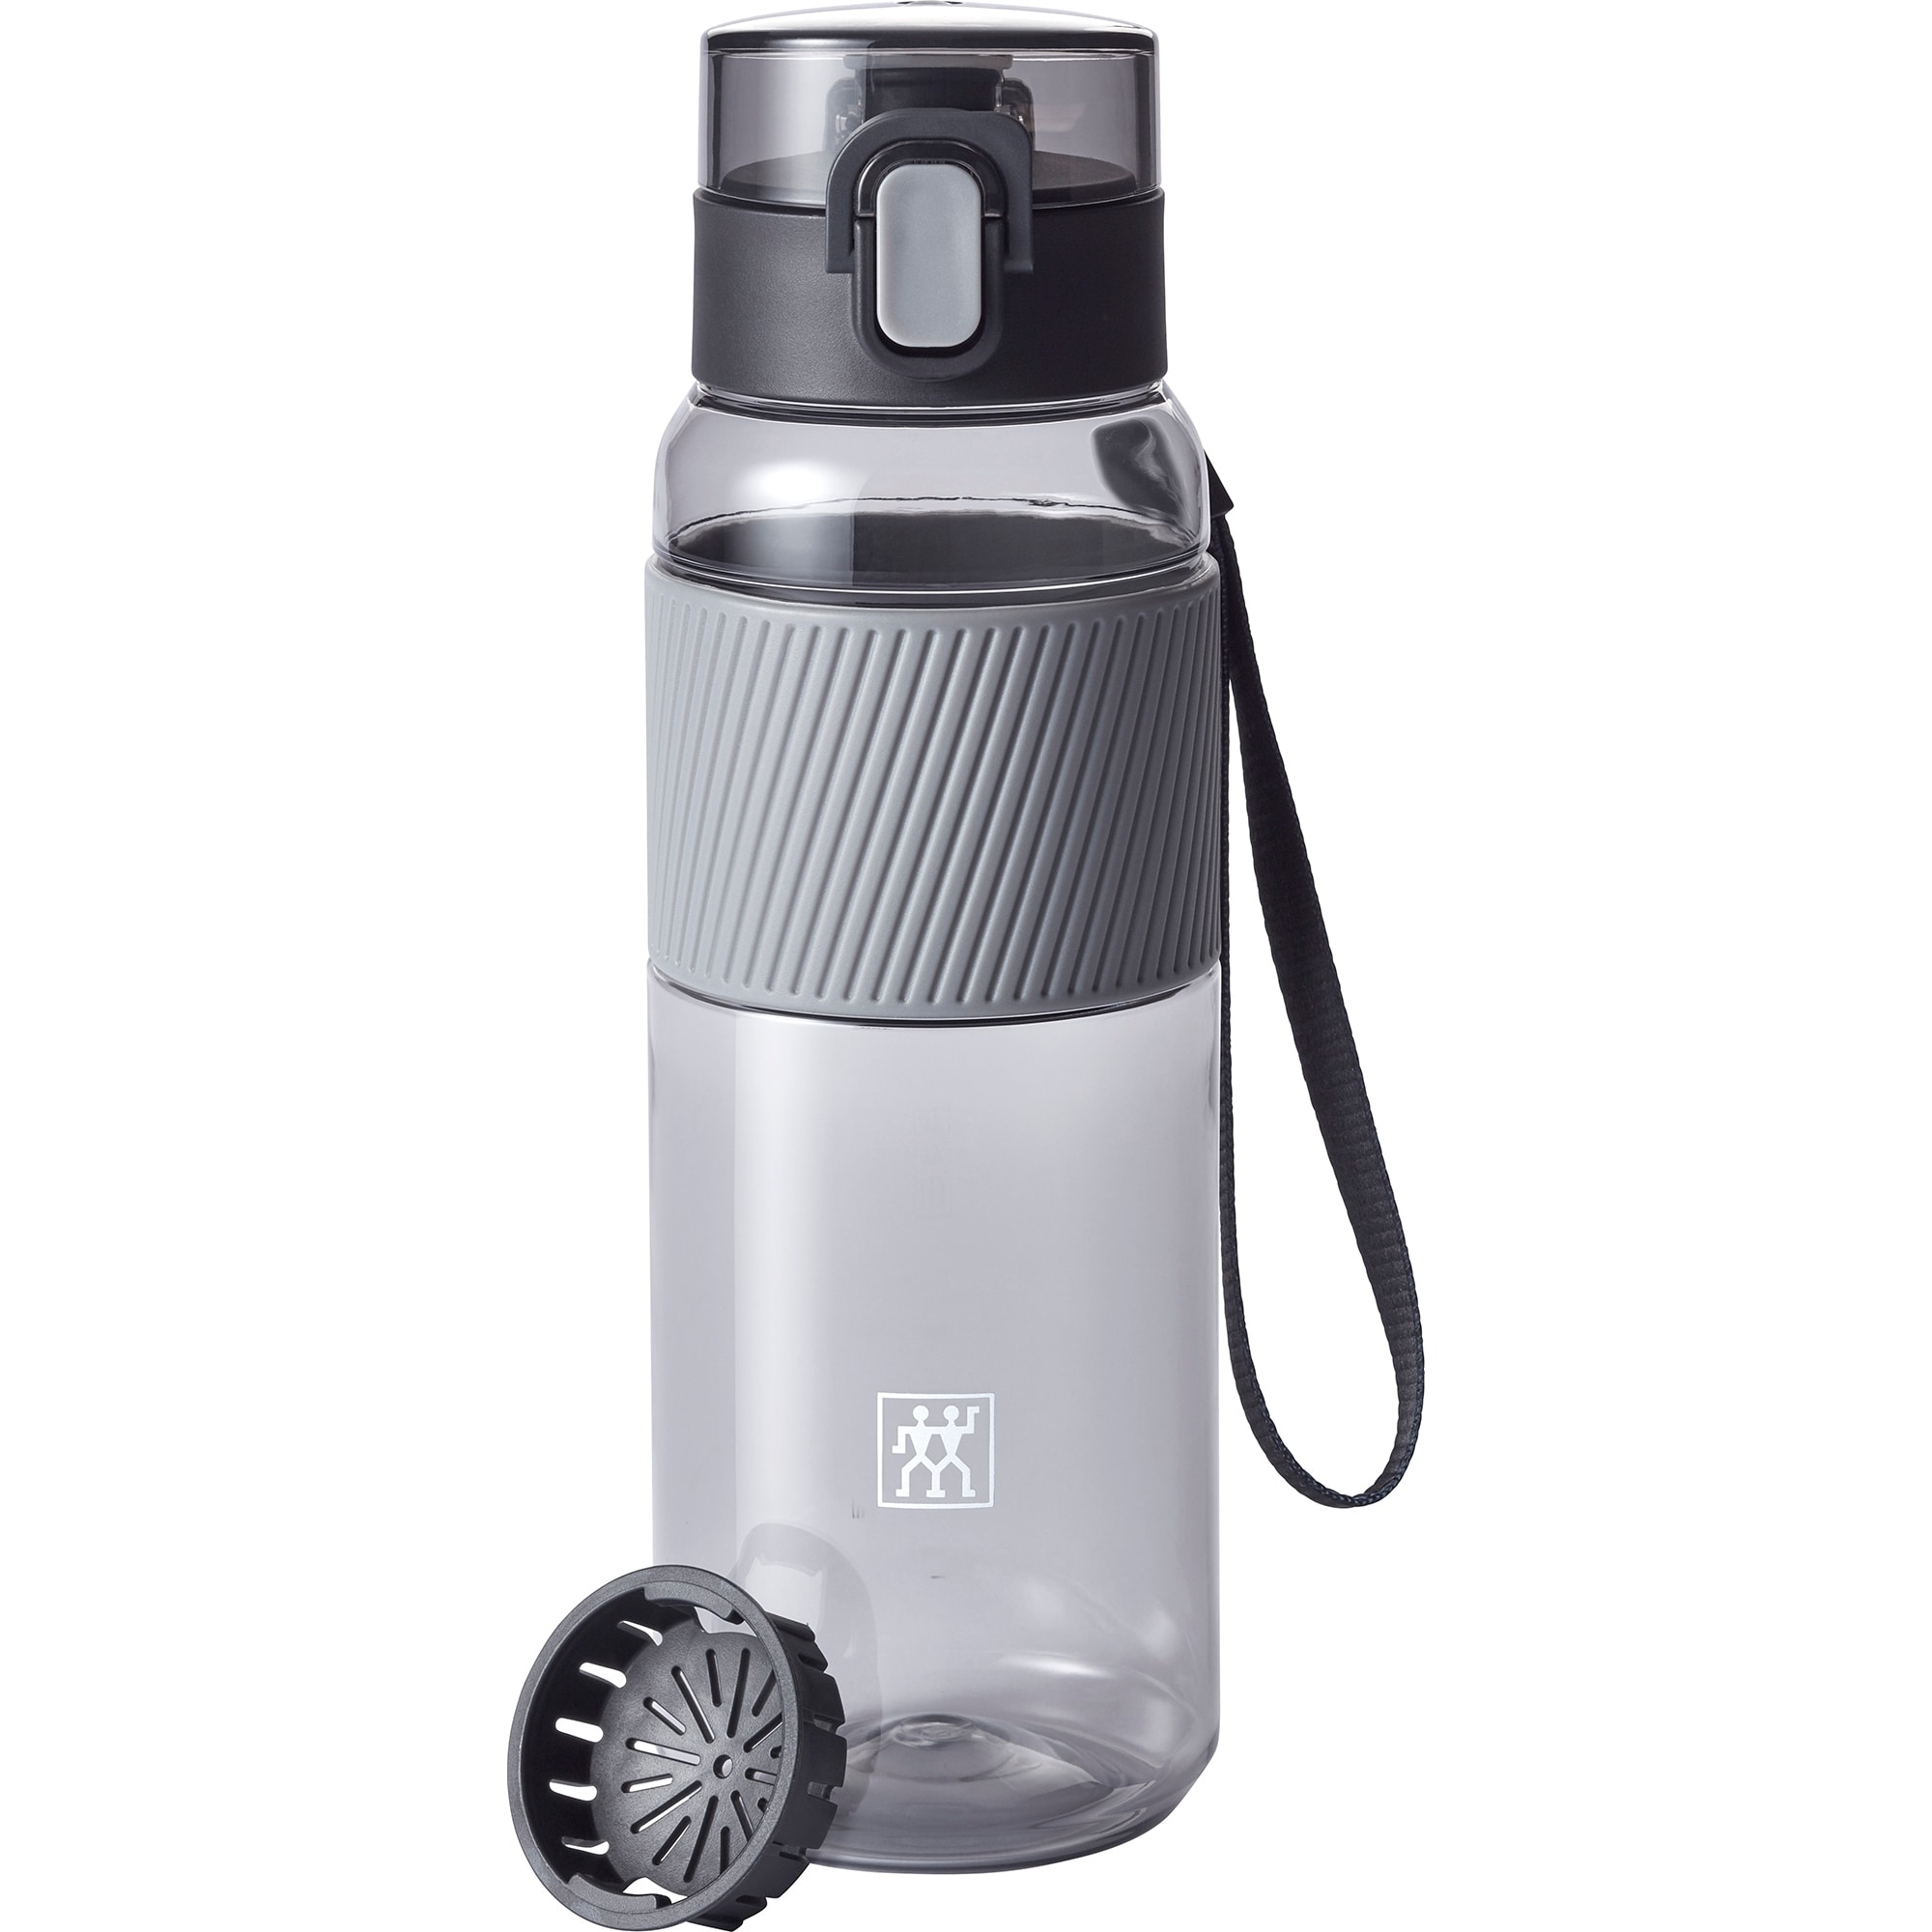 https://ak1.ostkcdn.com/images/products/is/images/direct/79db8bdb3c457534a63b611335548e78668aec48/ZWILLING-Tritan-24-ounce-Water-Bottle.jpg